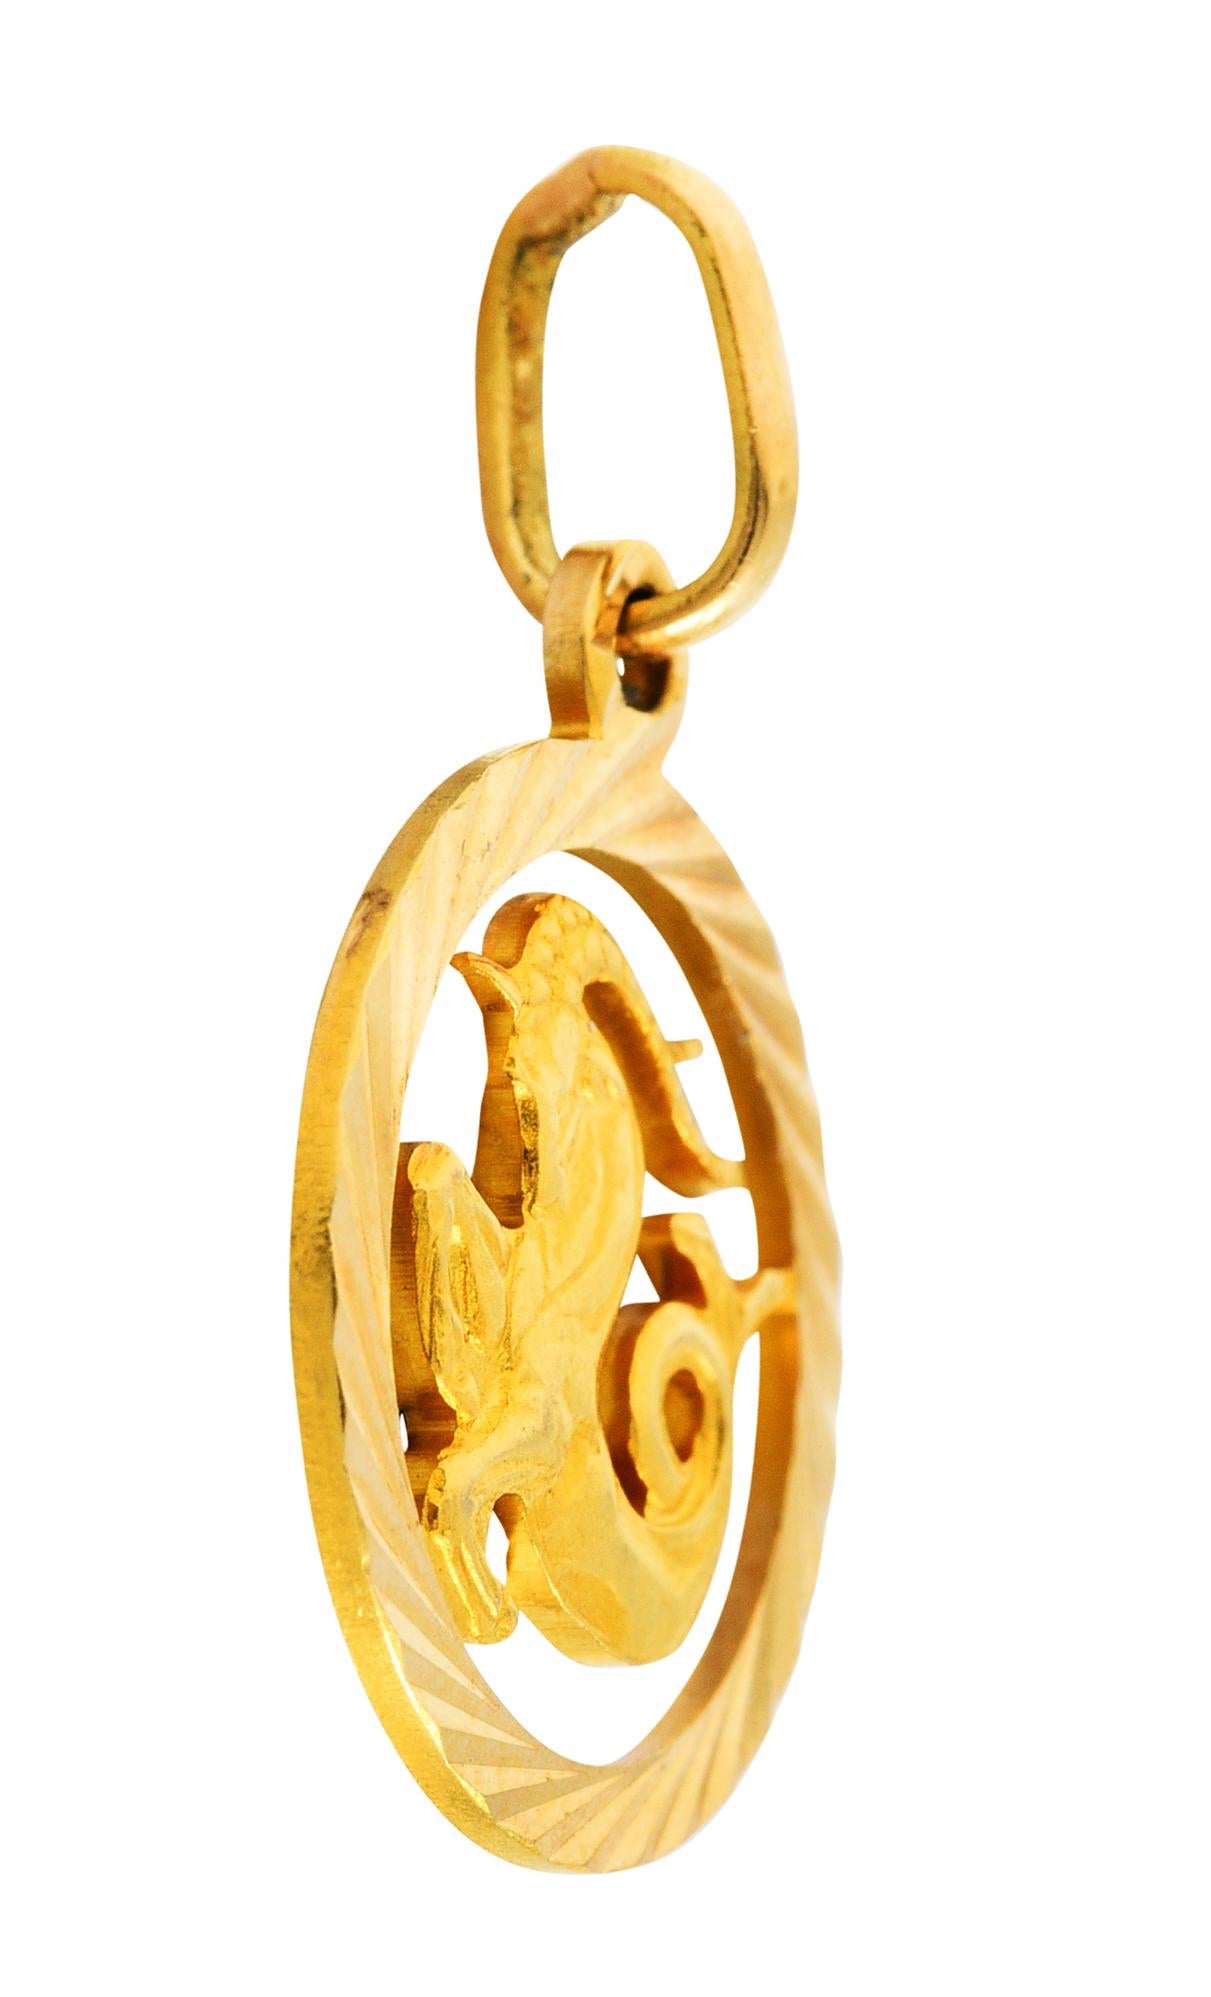 Designed as a pierced open circle with a deeply faceted surround

Centering a highly rendered image of a nautical ram 

With a scrolling finned tail and elongated horns

With Italian assay marks for 18 karat gold

Circa: 1970s

Measures: 11/16 x 1